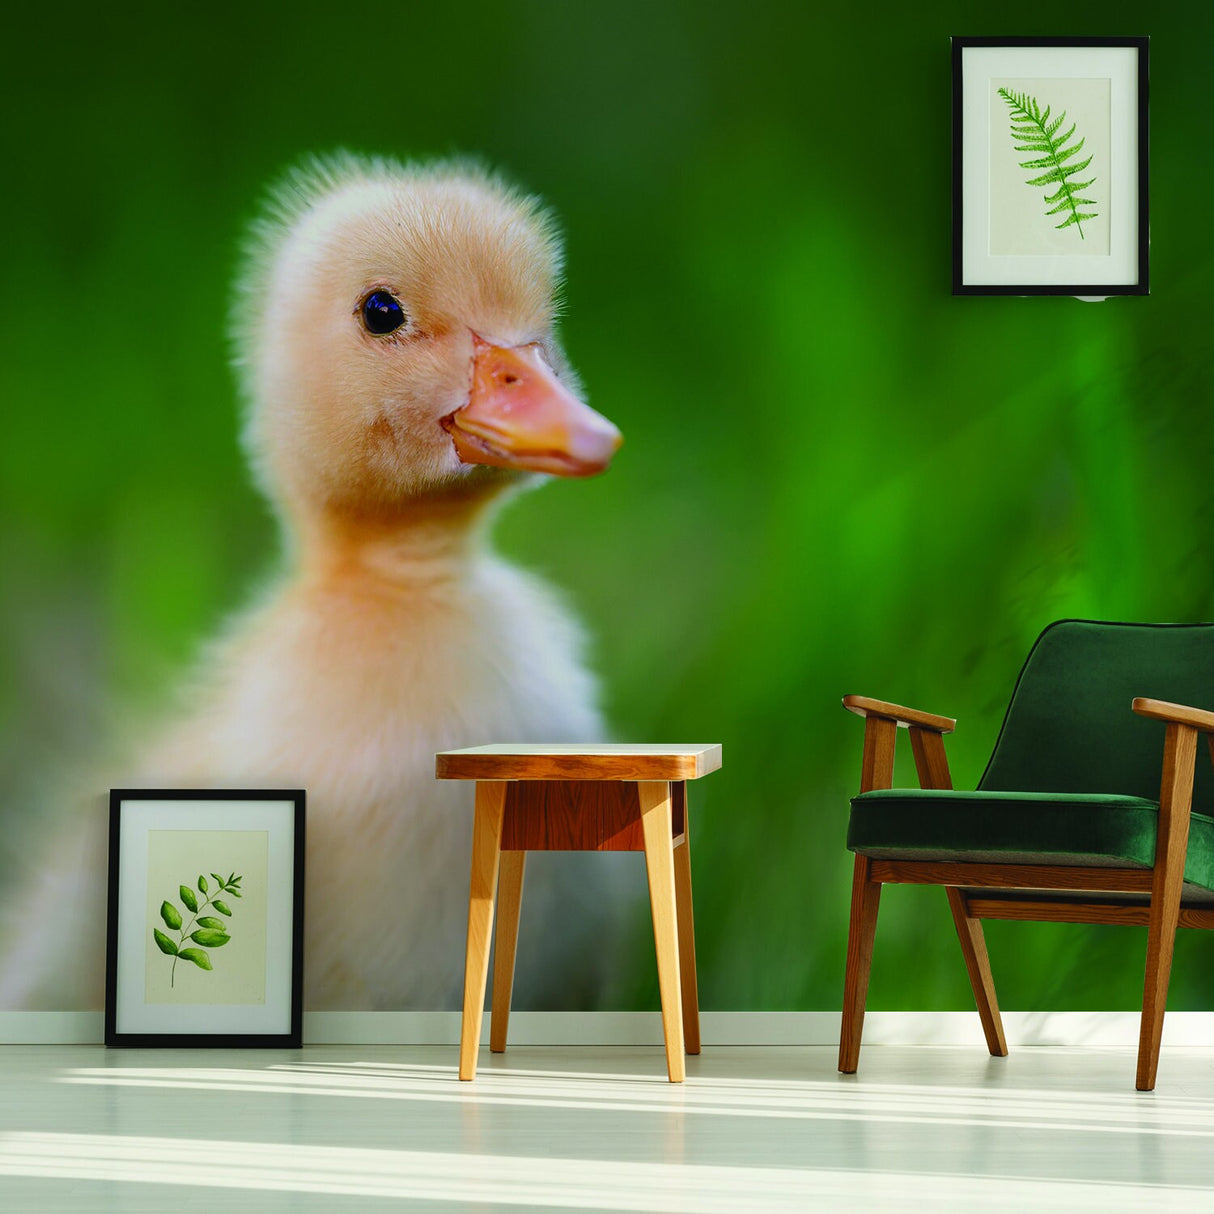 Duck Wallpaper Vinyl Decal Decor - Home Bedroom Peel And Stick Removable Art Wall Paper Sticker